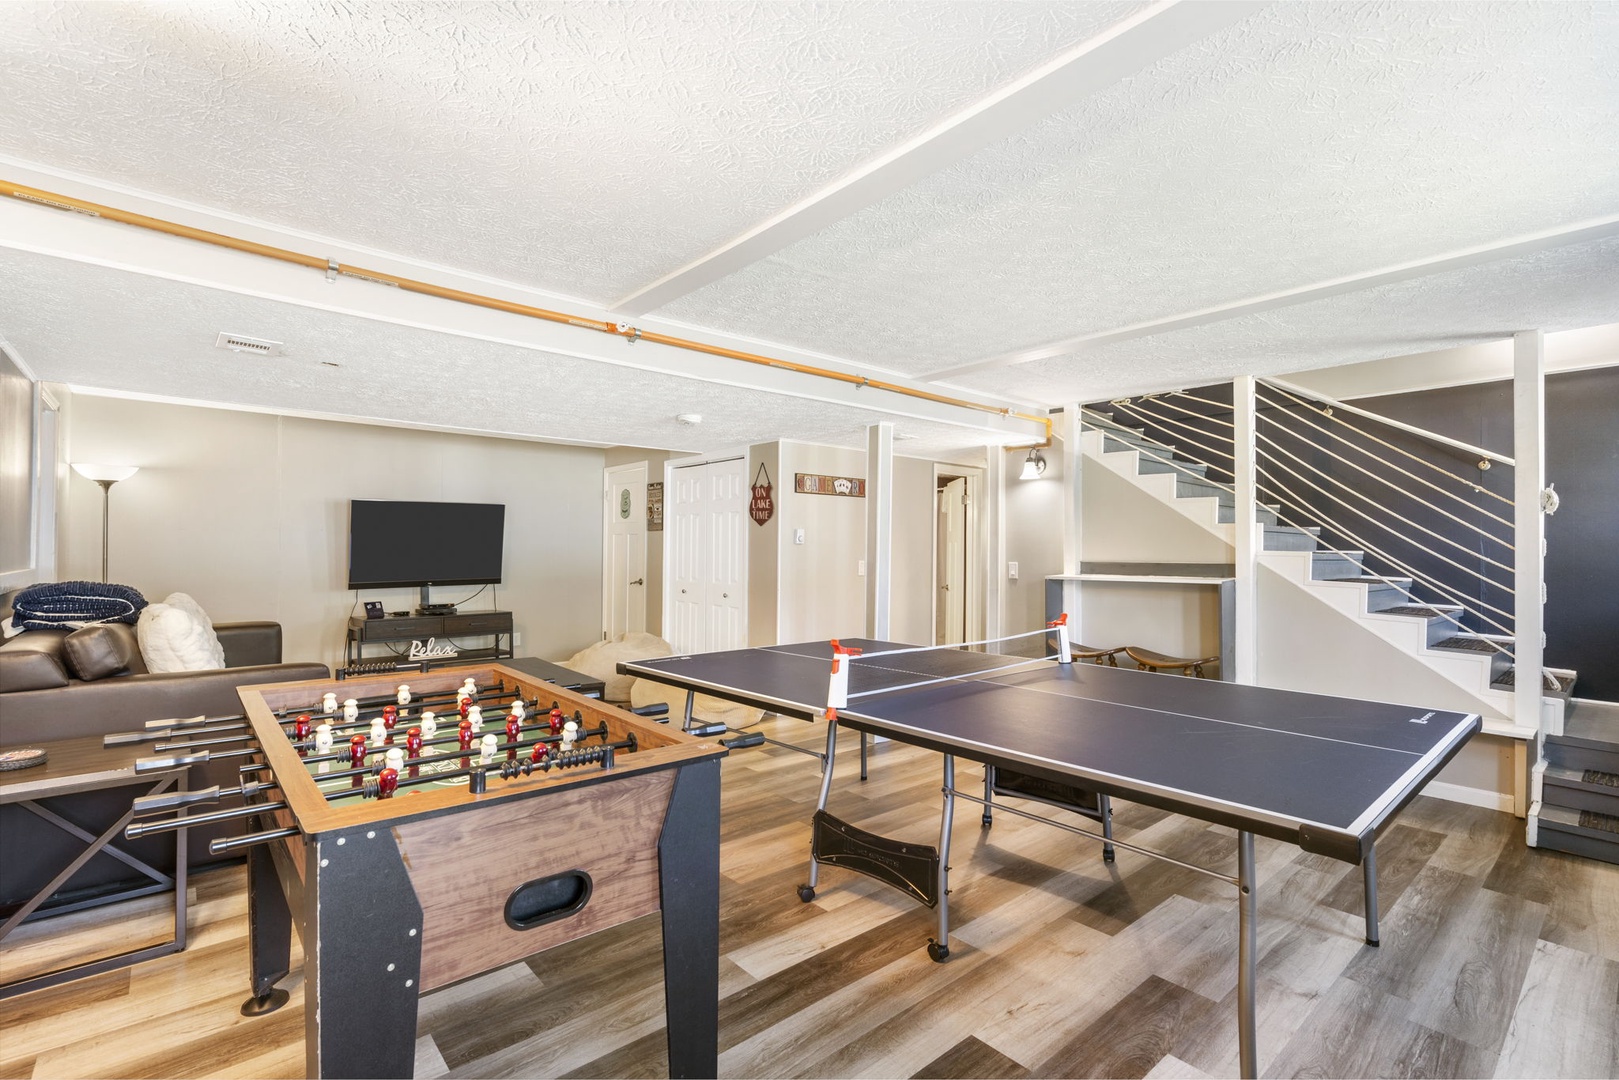 Unleash your competitive side or kick back & relax on the lower level